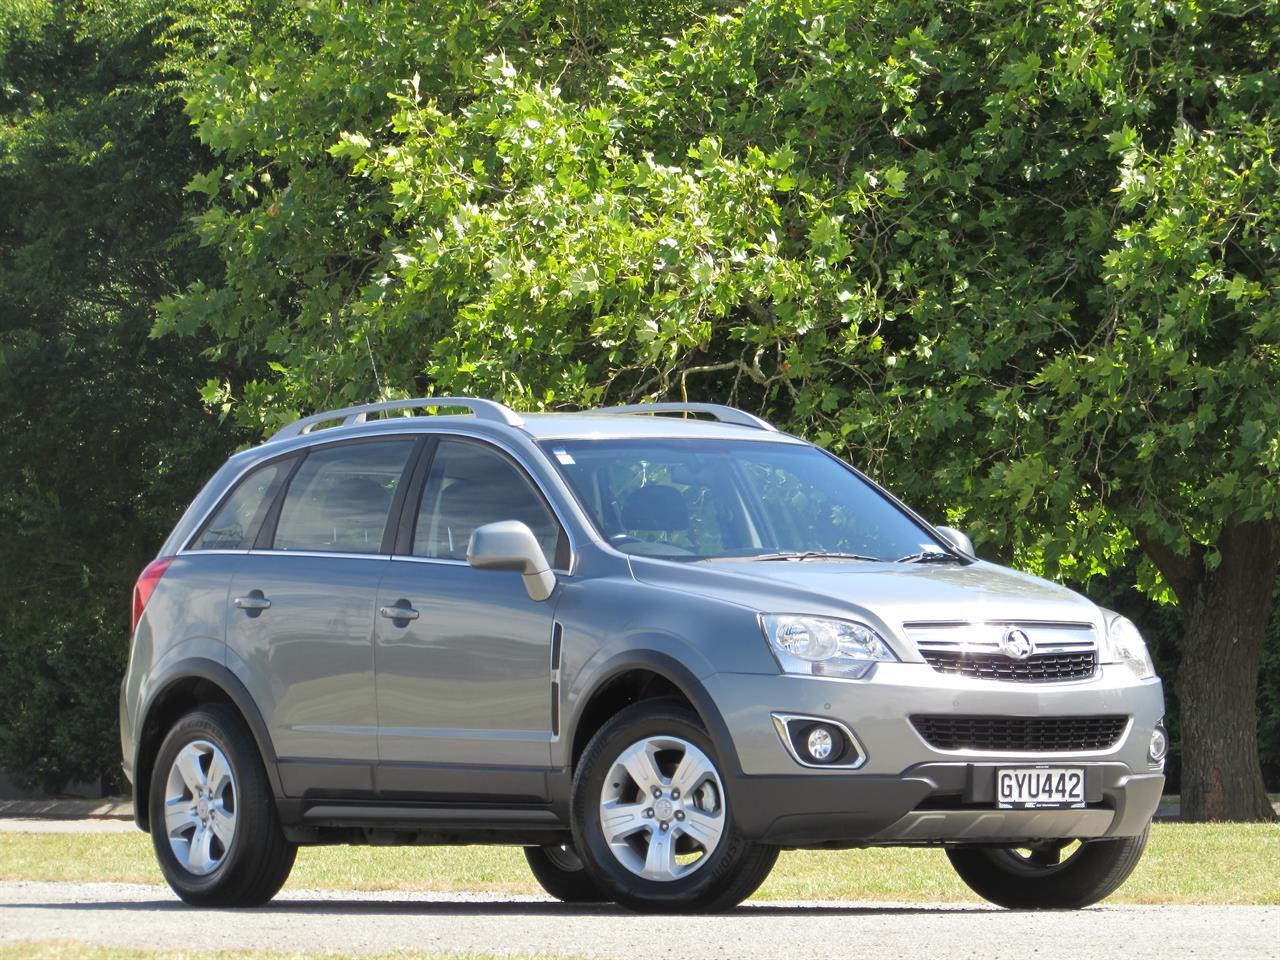 NZC best hot price for 2013 Holden Captiva in Christchurch